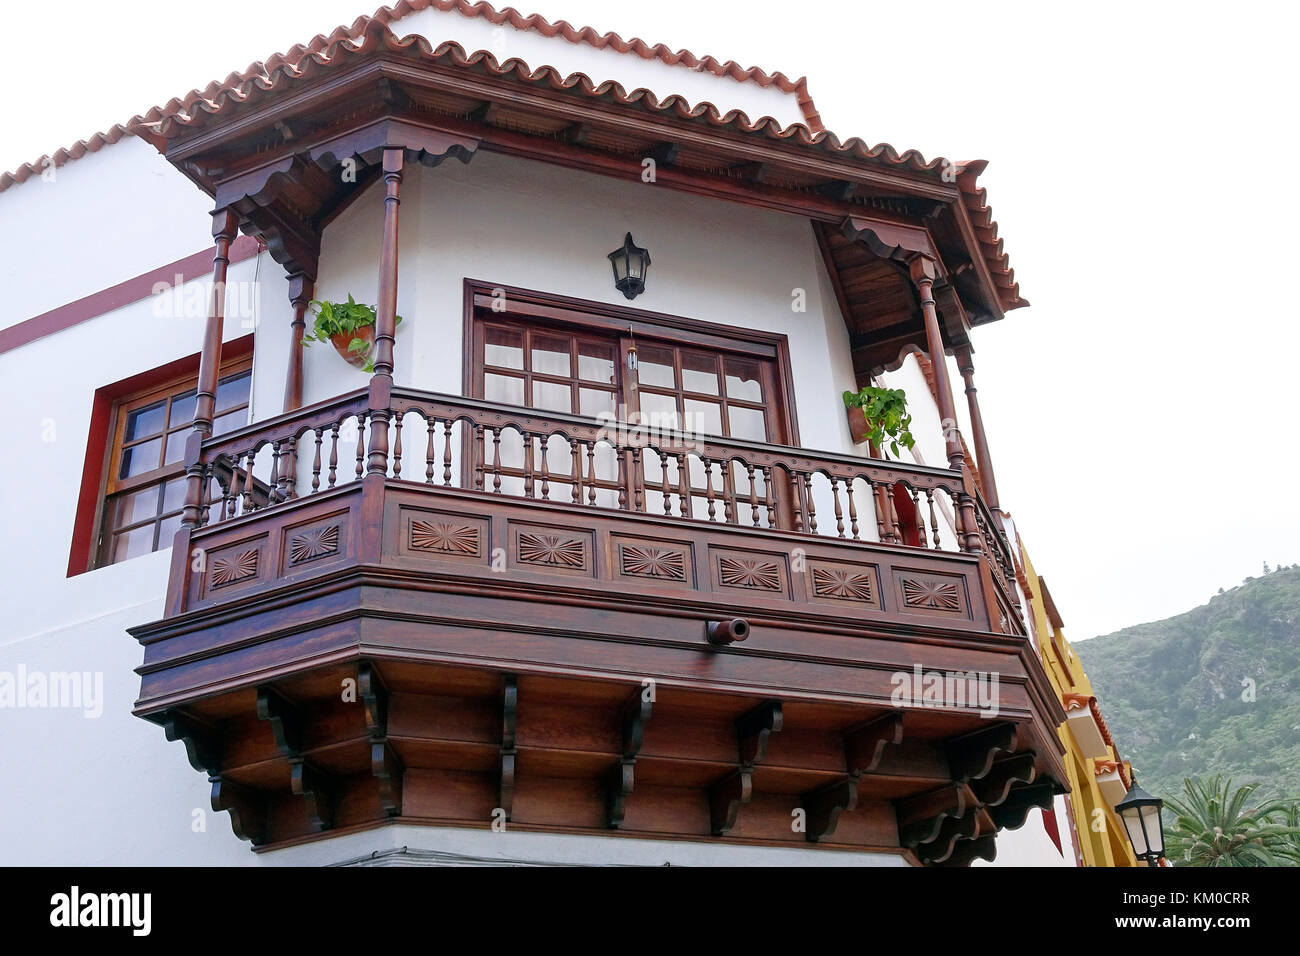 Traditional canarian wooden balcony at the village Garachico, north-west coast, Tenerife island, Canary islands, Spain Stock Photo